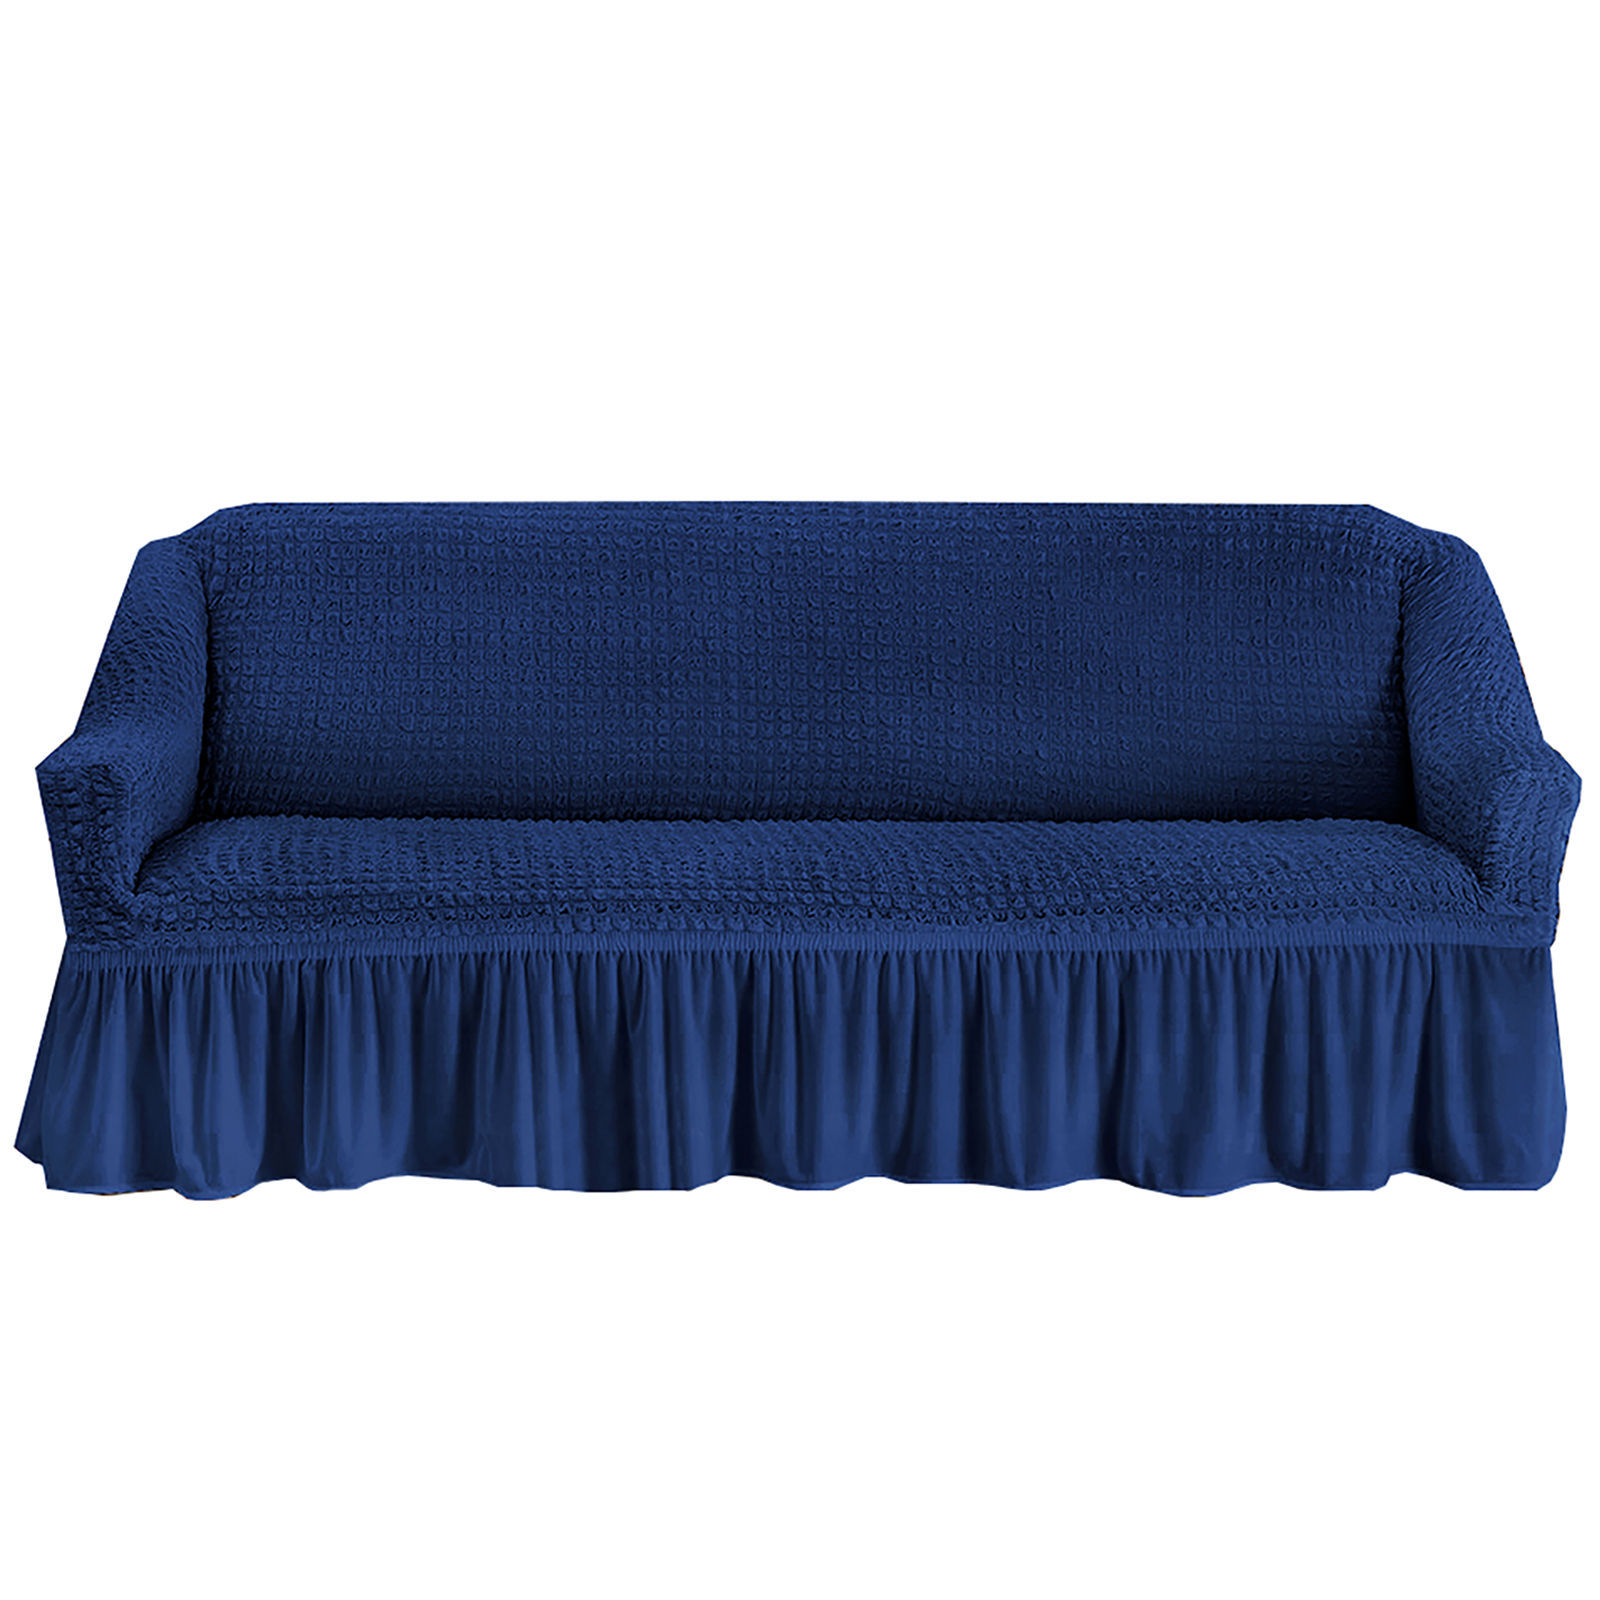 Stretch Sofa Slipcover, 3 Seater Sofa Slipcovers With Skirt With Armless Soft Sofa Cover Elastic Straps Sofa Slipcover For Living Room Kids Pets-blue-Small